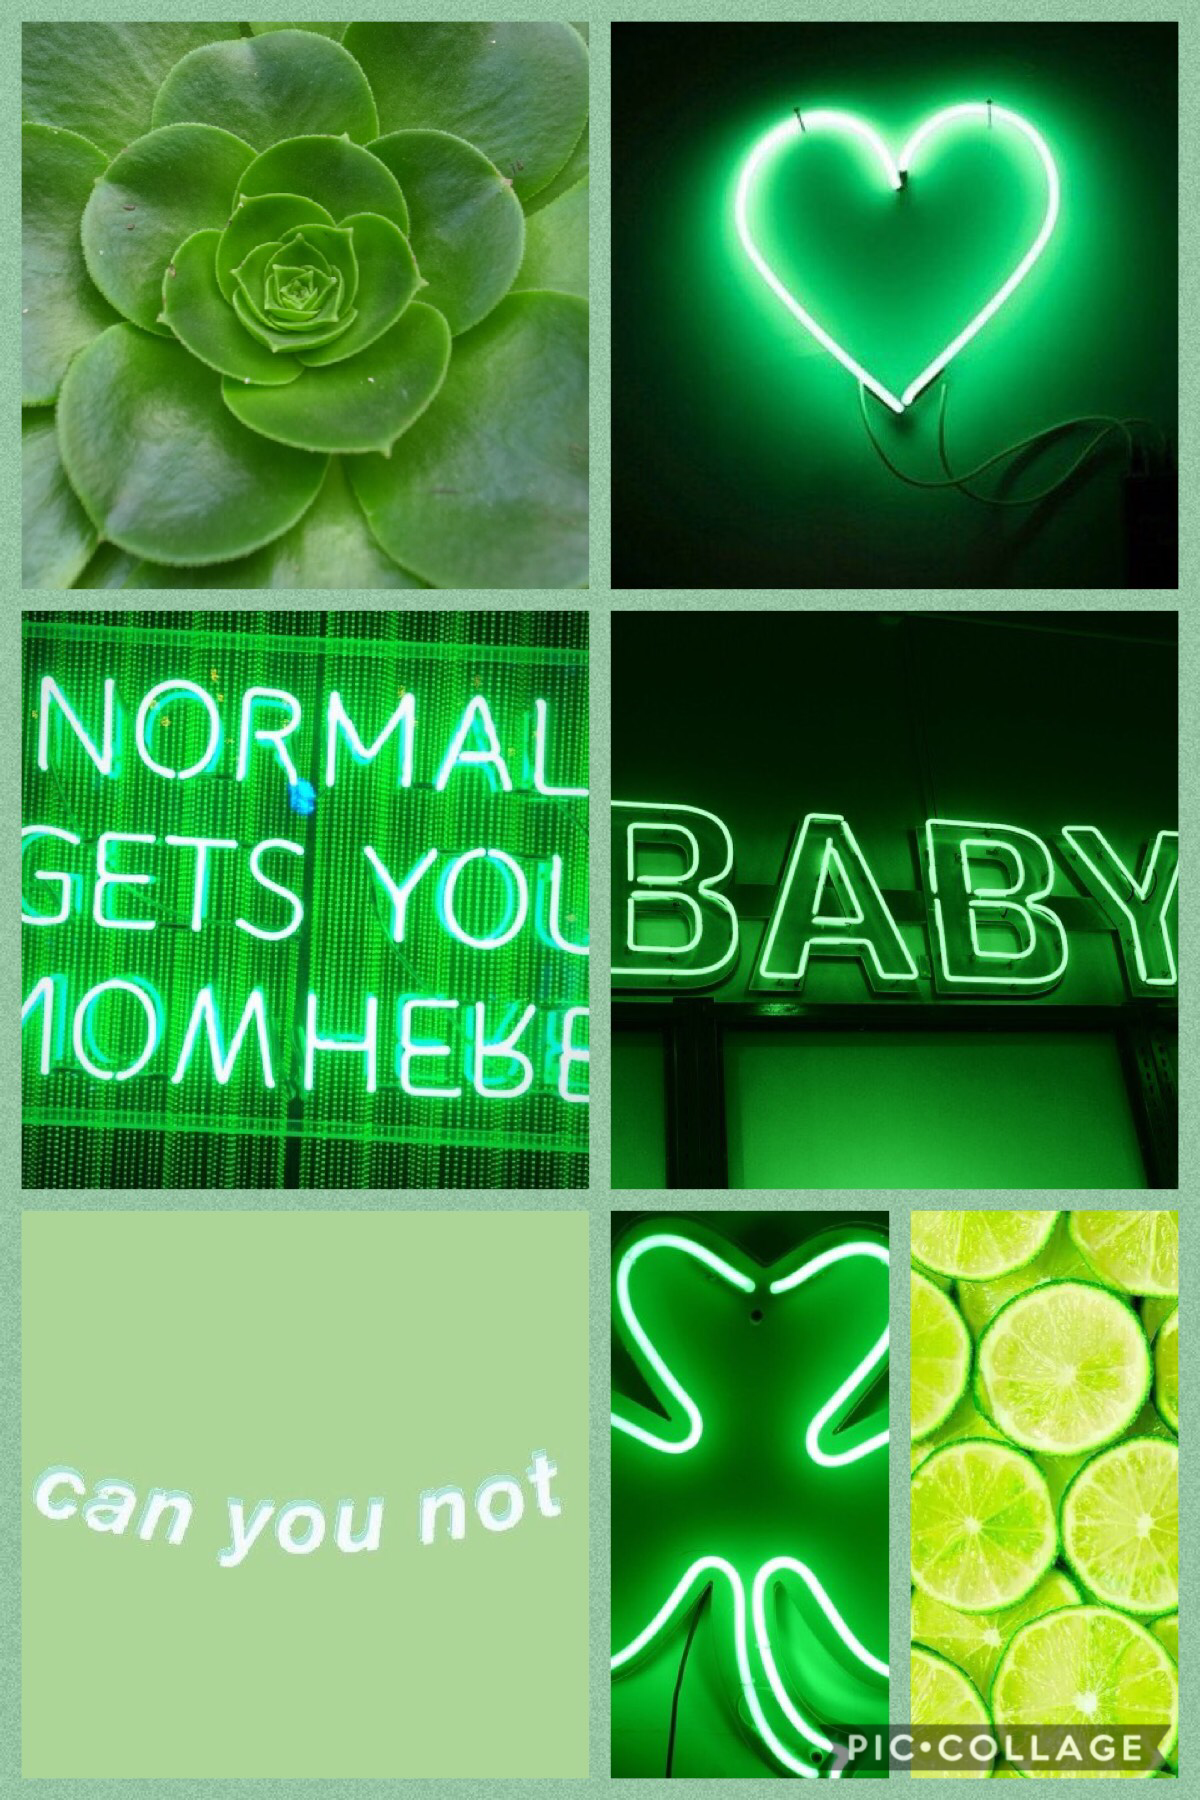 Lucky aesthetic🍀🌵💚❇️ You’ll get lucky if you like this!